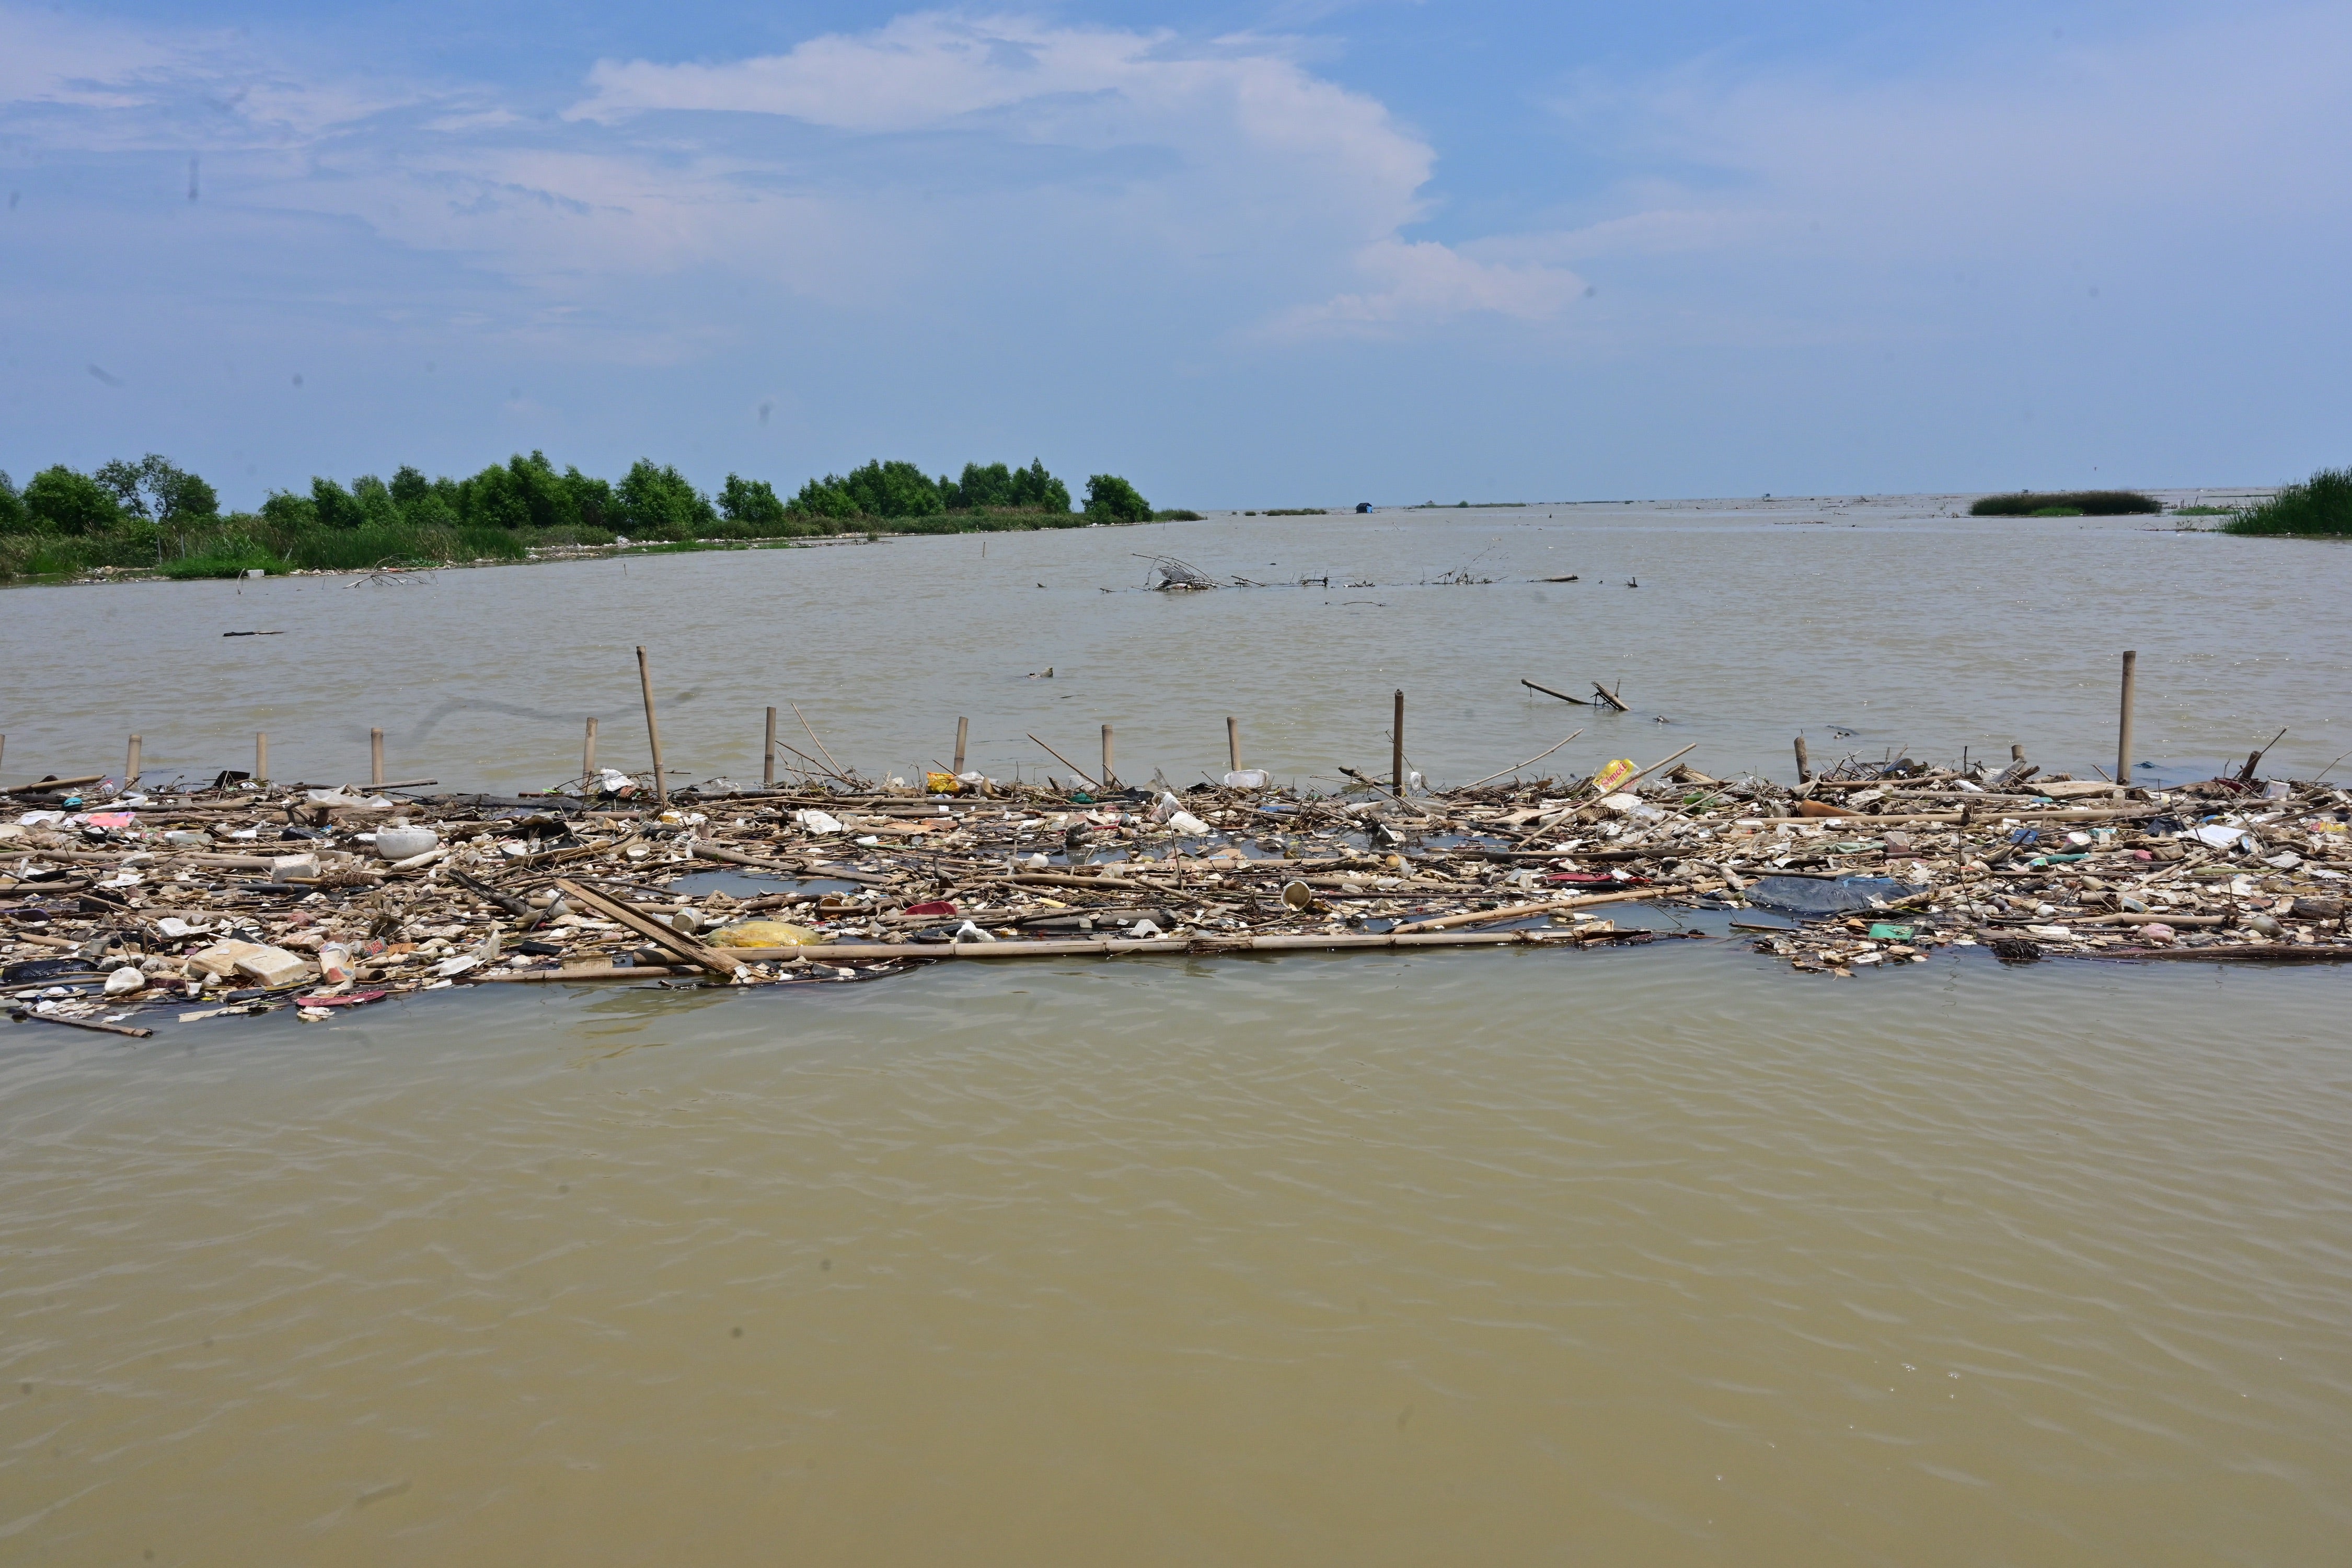 This picture taken in October 2020 shows rubbish floating in the waters off the coast near Teluk Naga